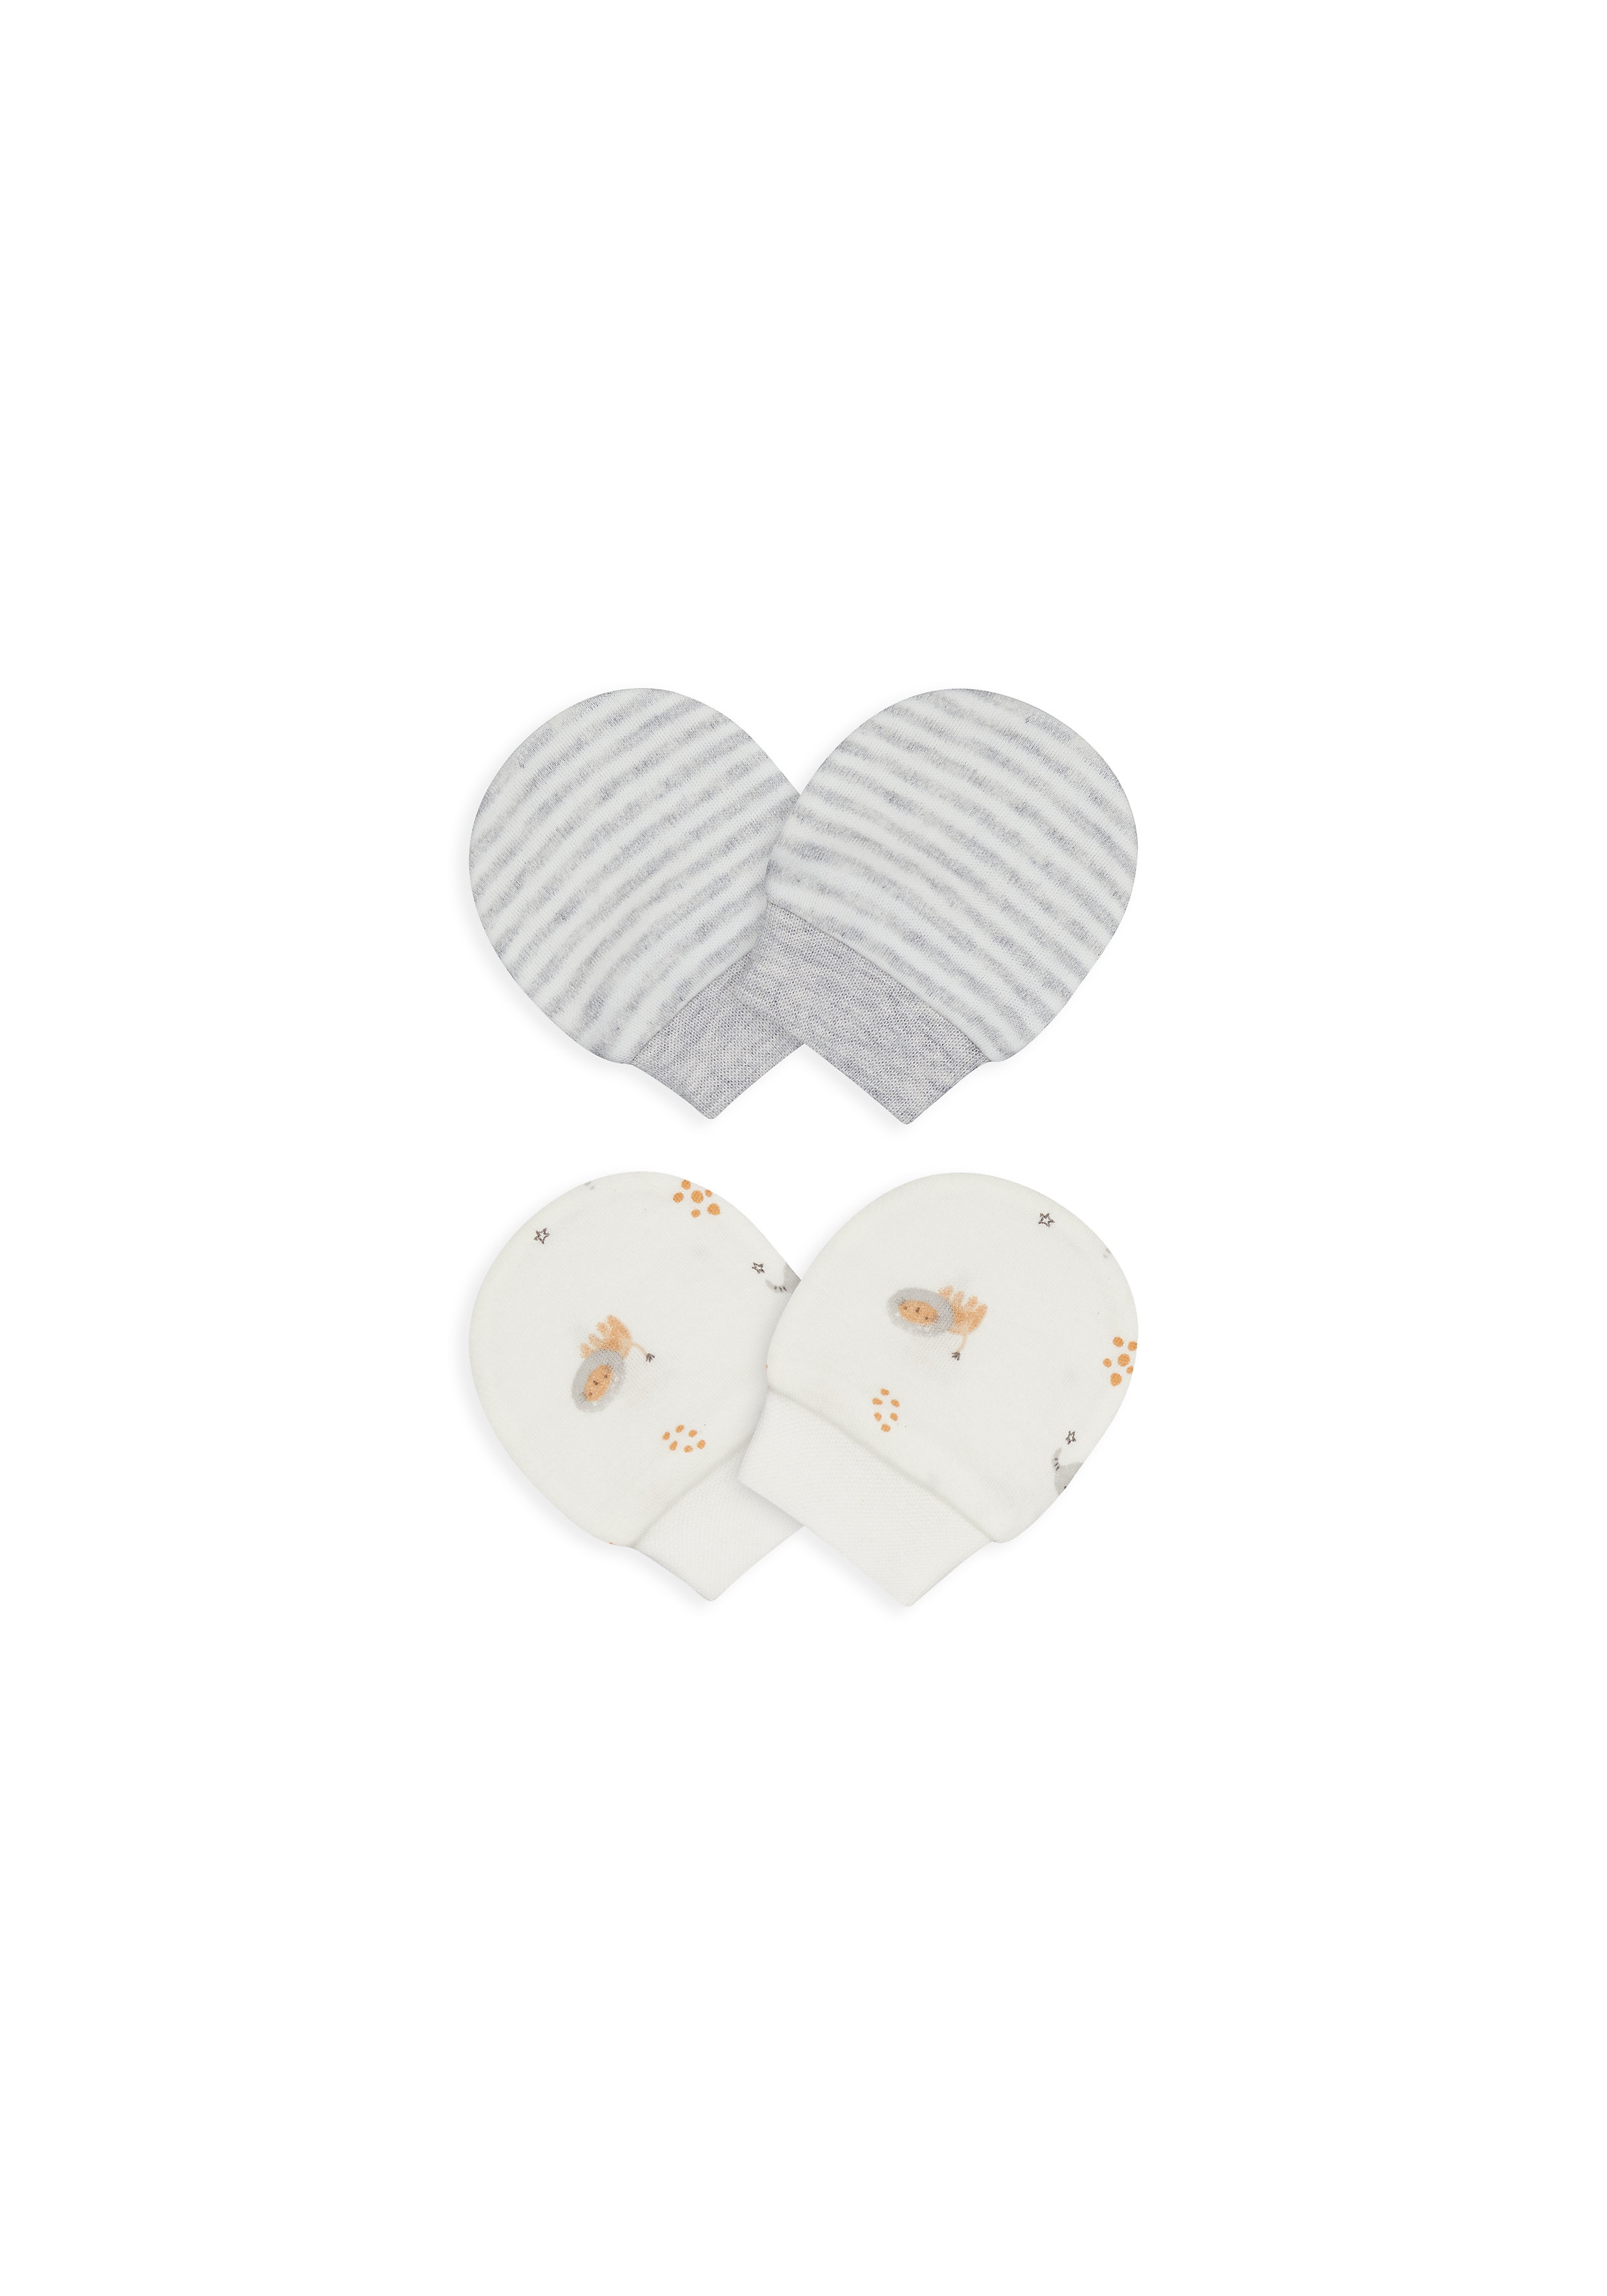 Mothercare | Unisex Mitts Striped And Printed - Pack Of 2 - Grey & White 0